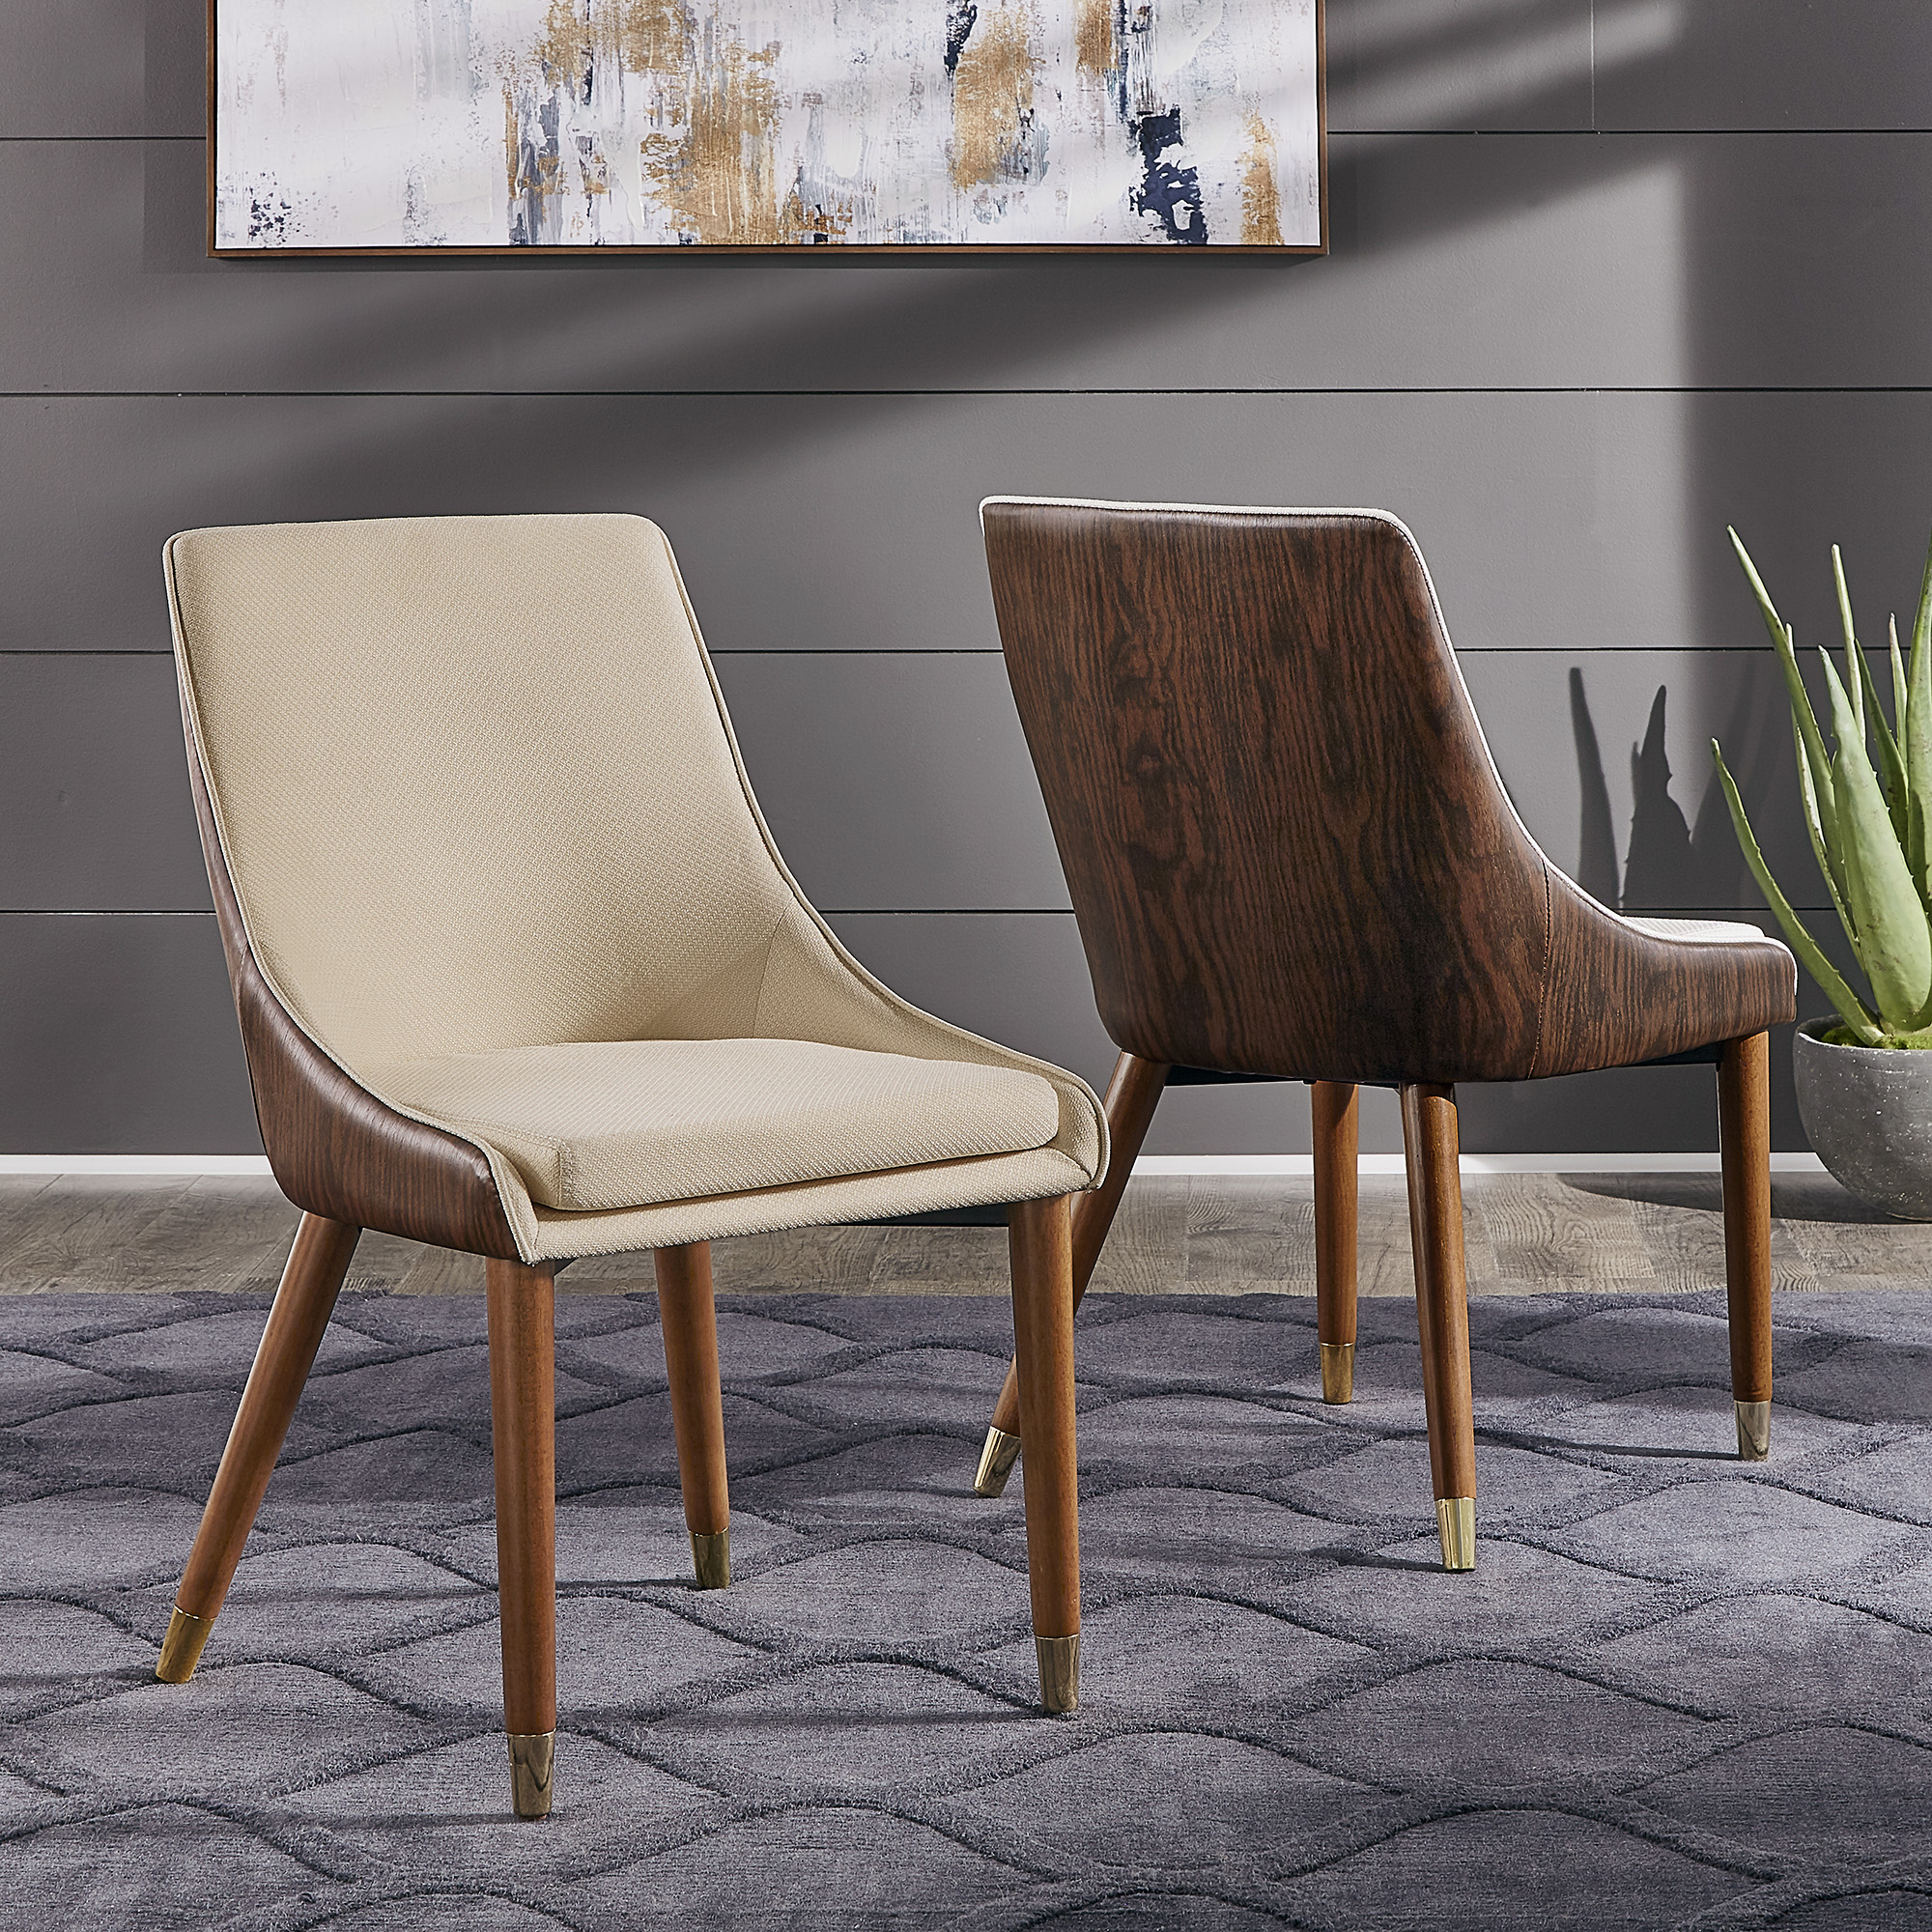 Two-Tone Faux Leather Upholstered Dining Chairs (Set of 2)